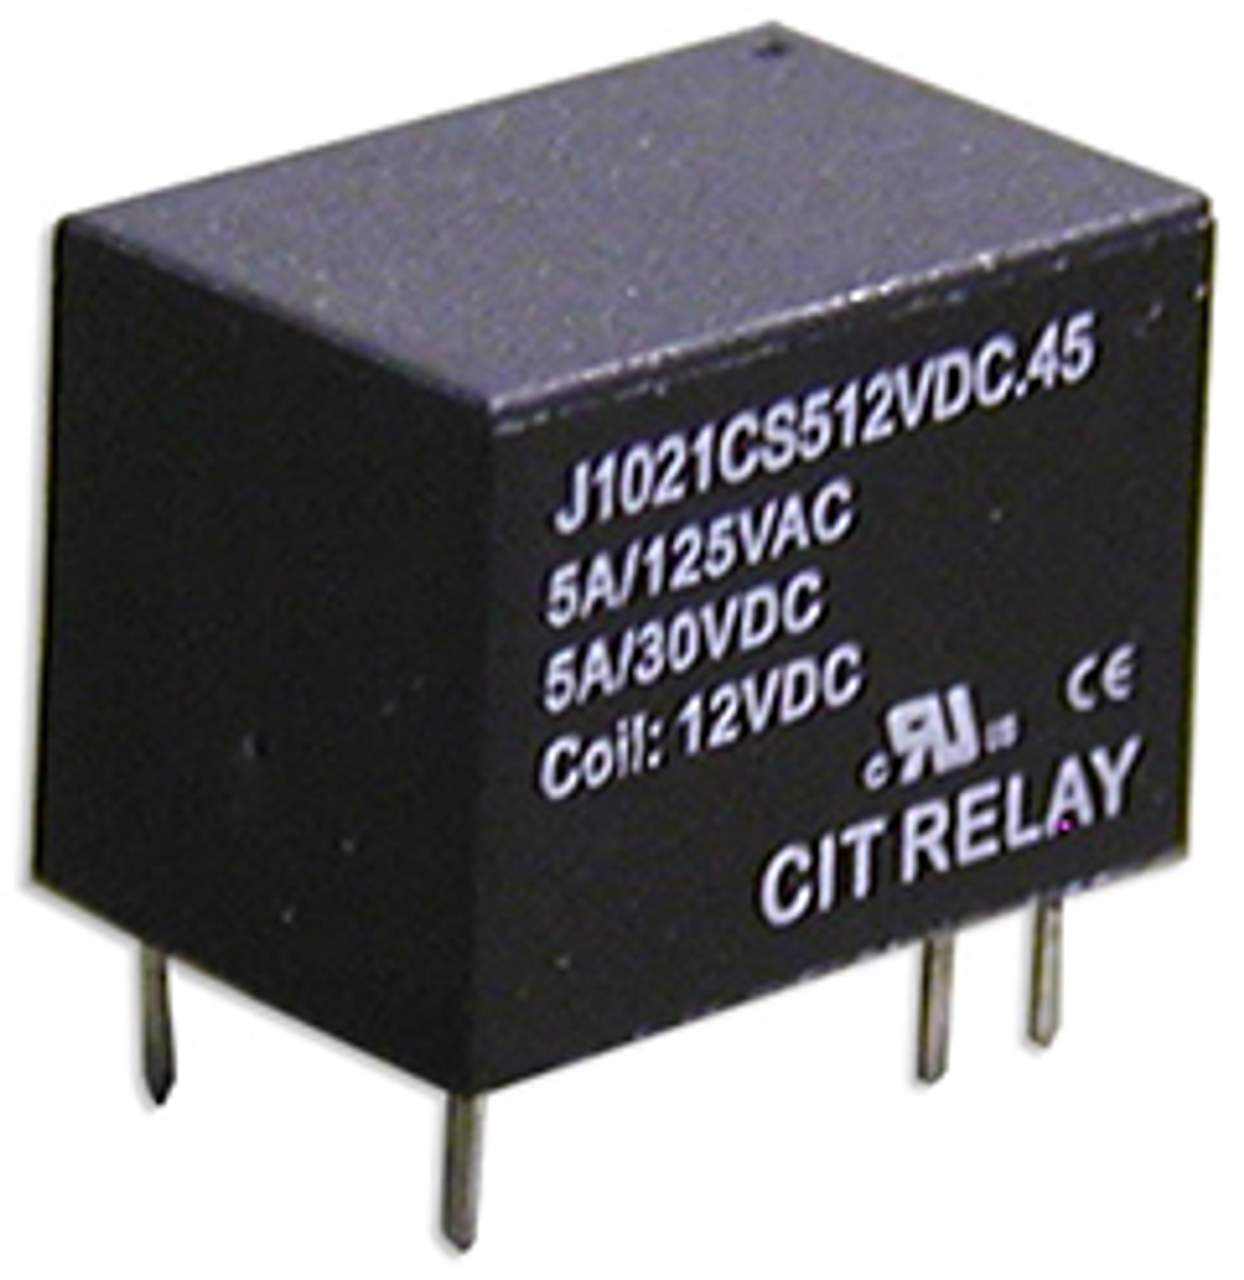 CIT Relay and Switch J1021AS3P5VDC.45 Power Relays